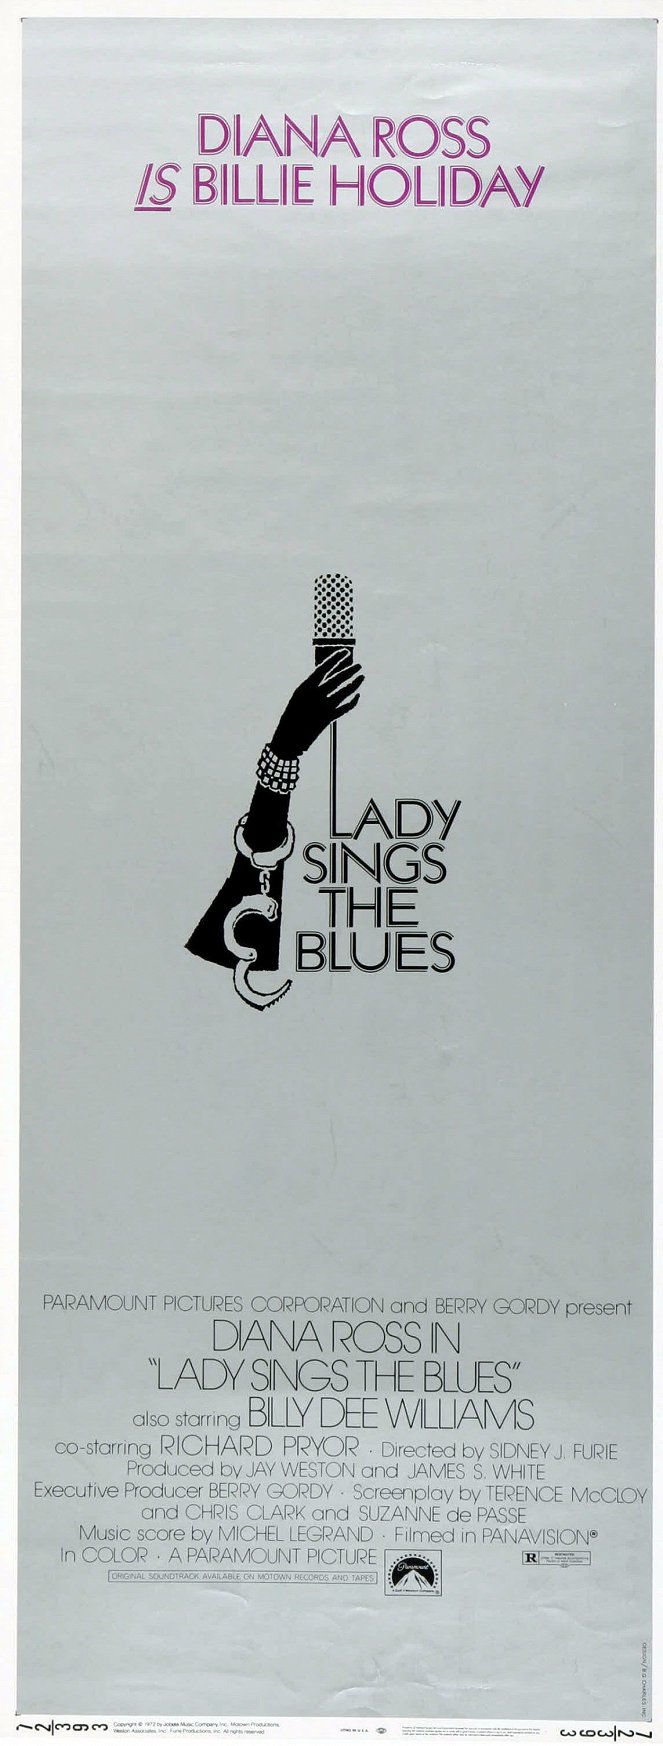 Lady Sings the Blues - Posters